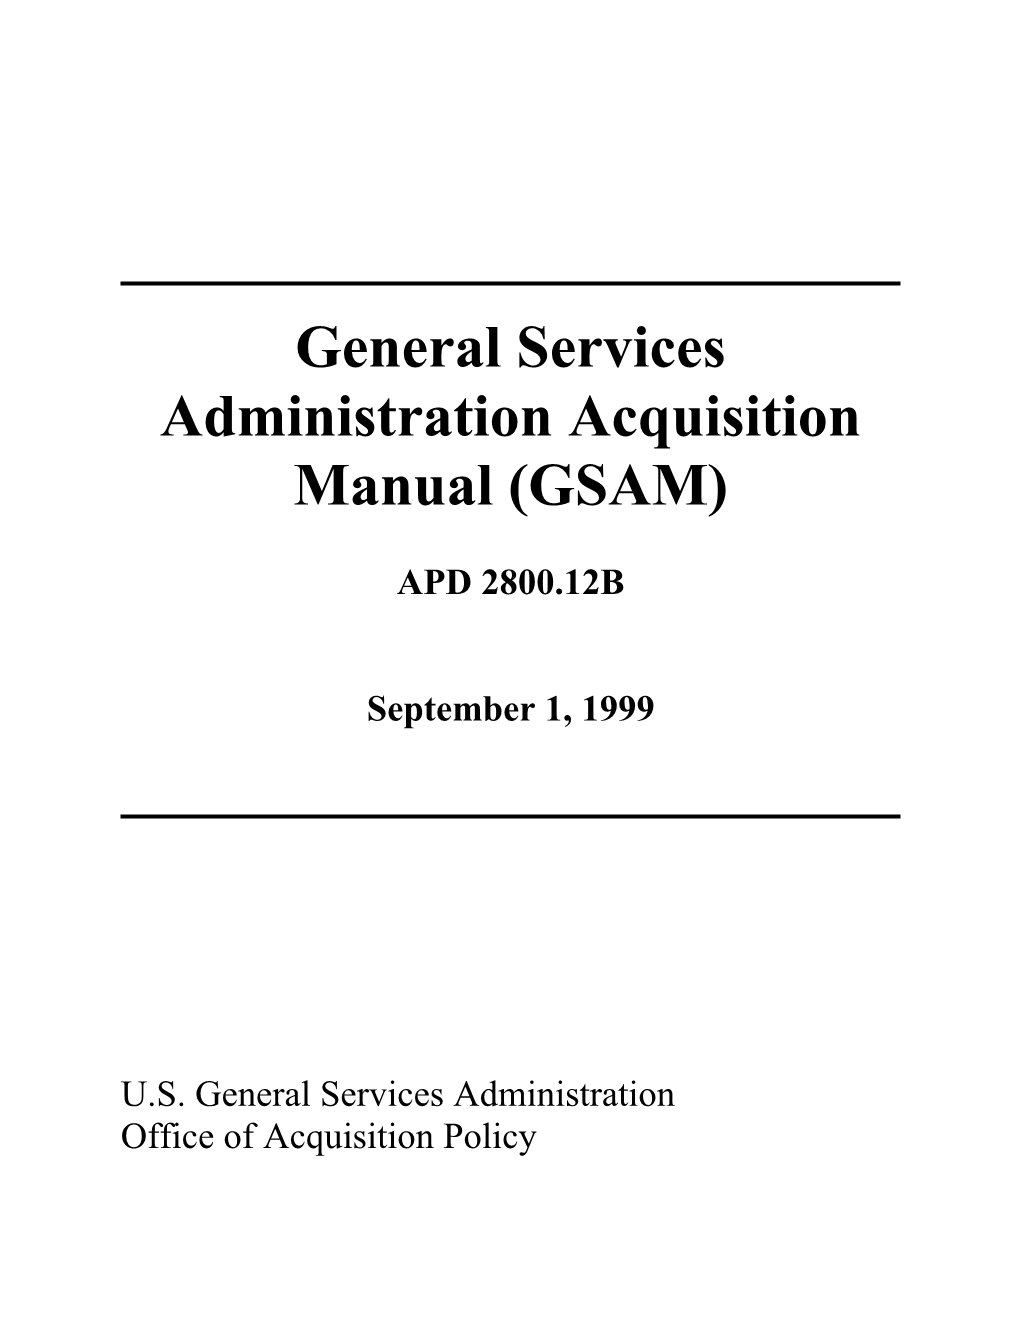 General Services Administration Acquisition Manual (GSAM)